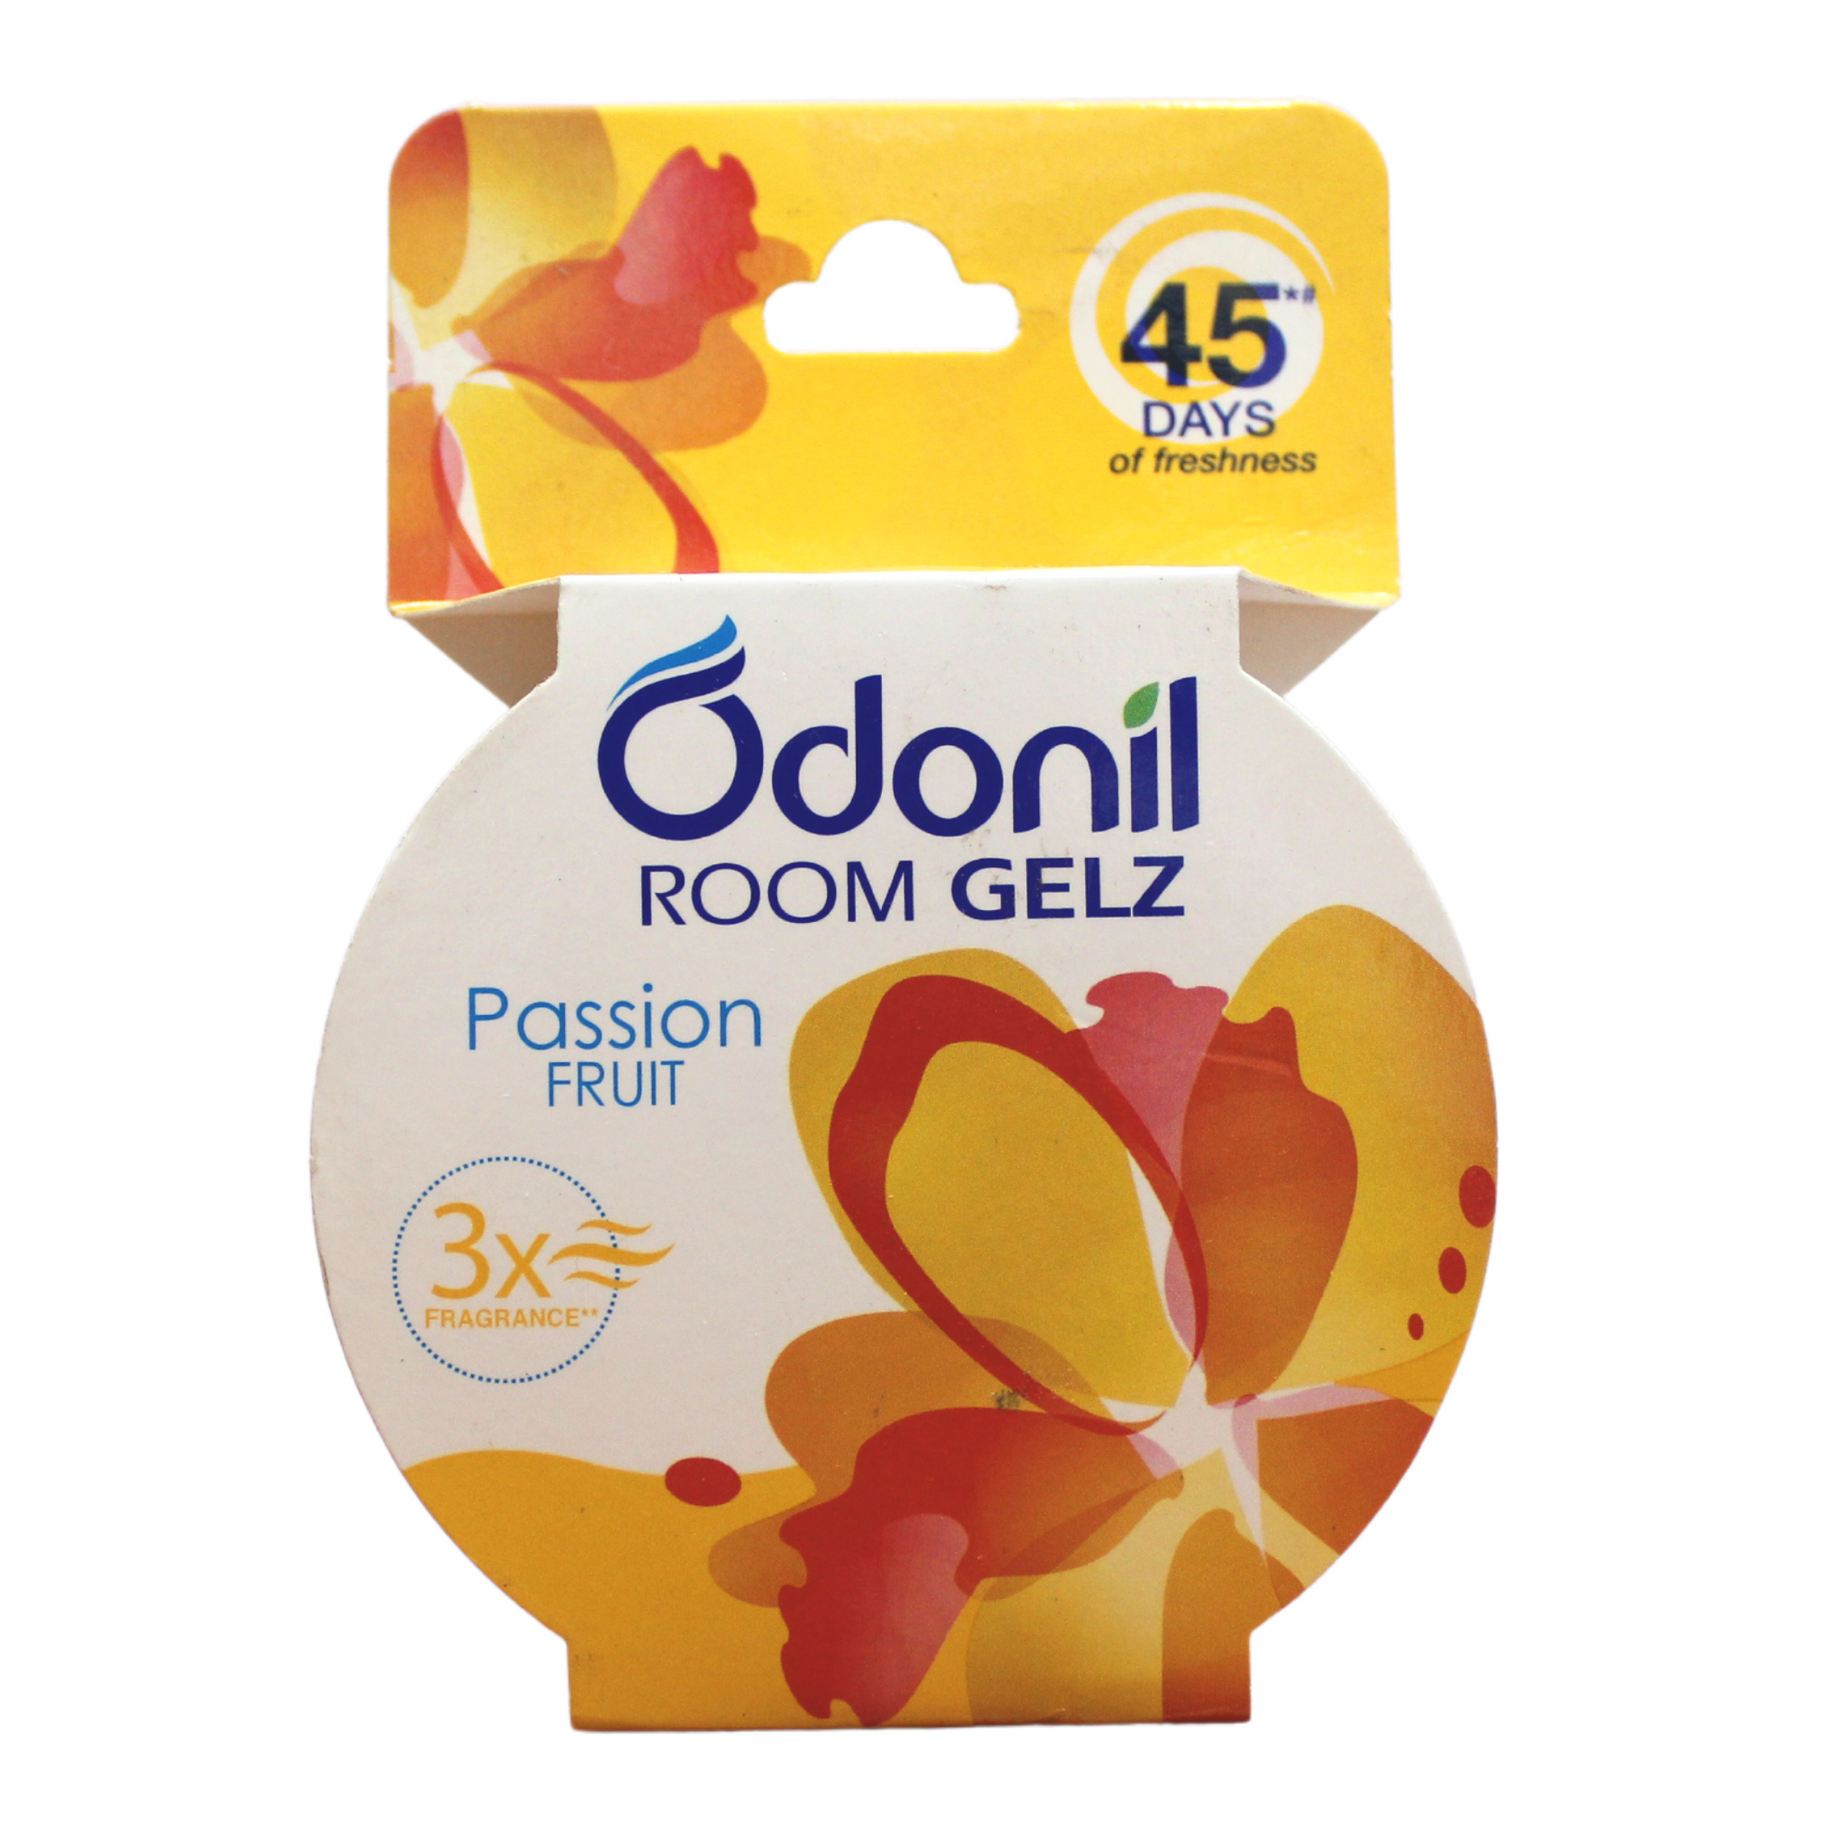 Shop Odonil Room Gelz 75gm - Passion fruit at price 80.00 from Dabur Online - Ayush Care